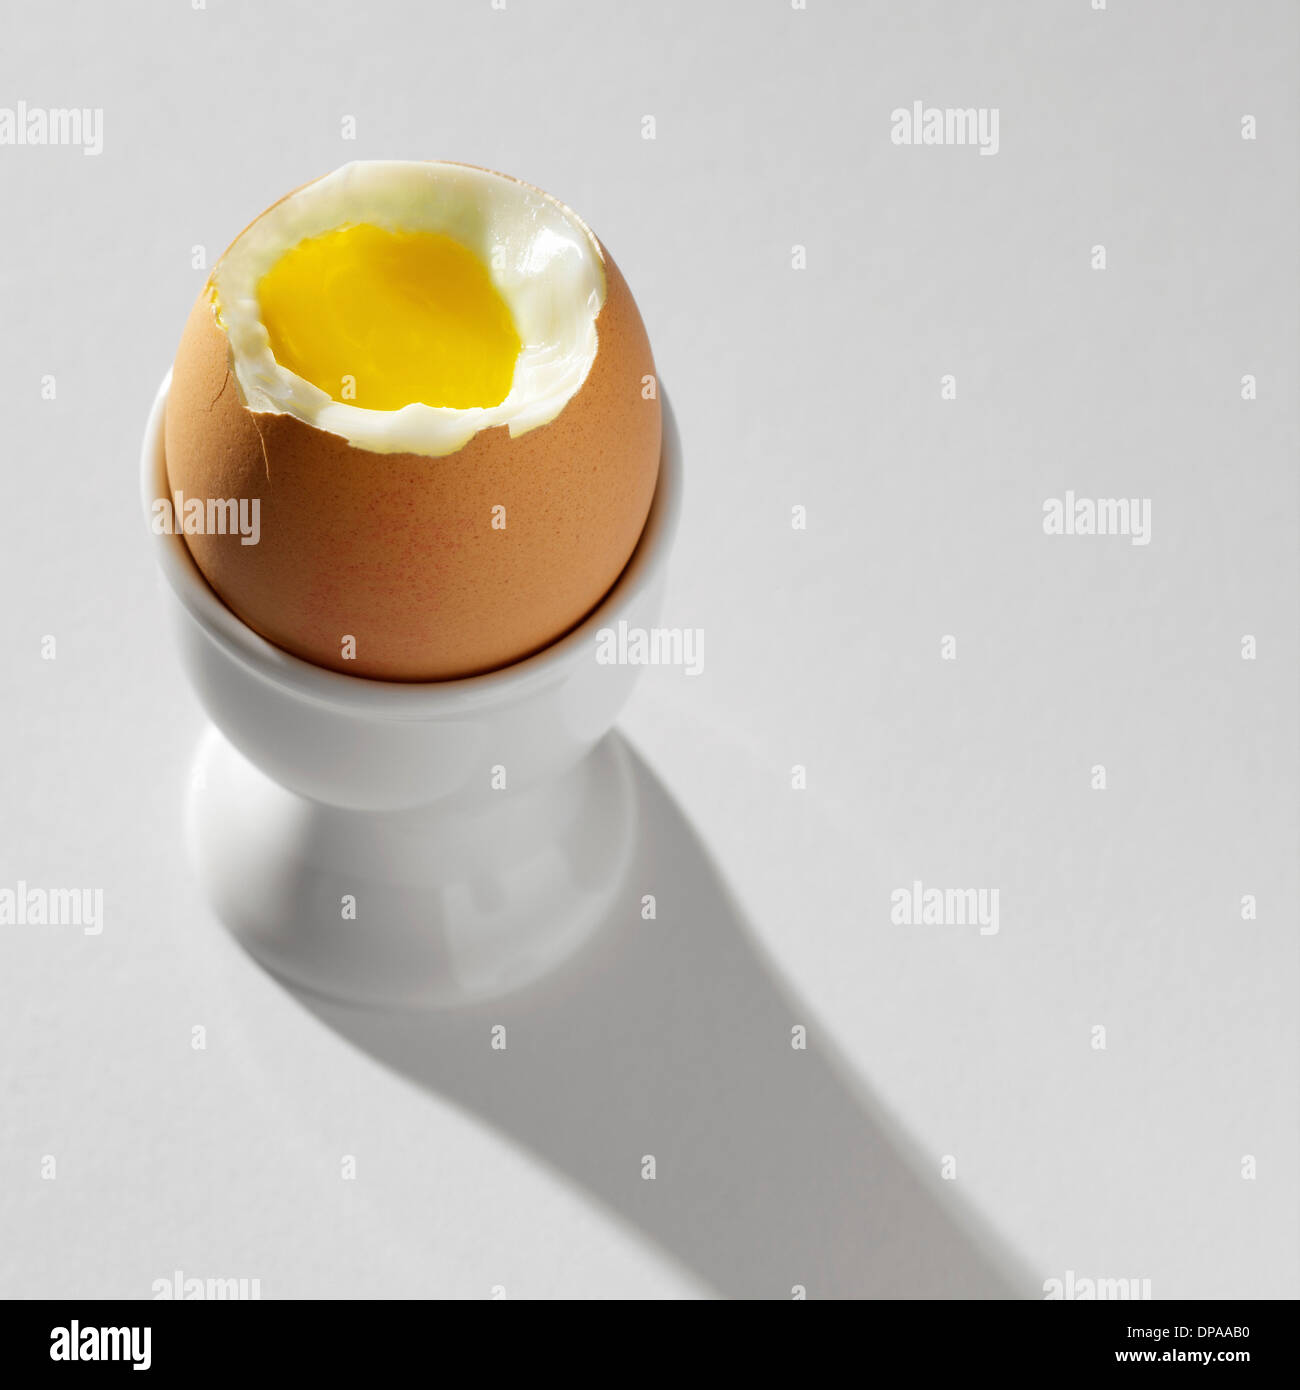 Boiled egg in egg cup Stock Photo